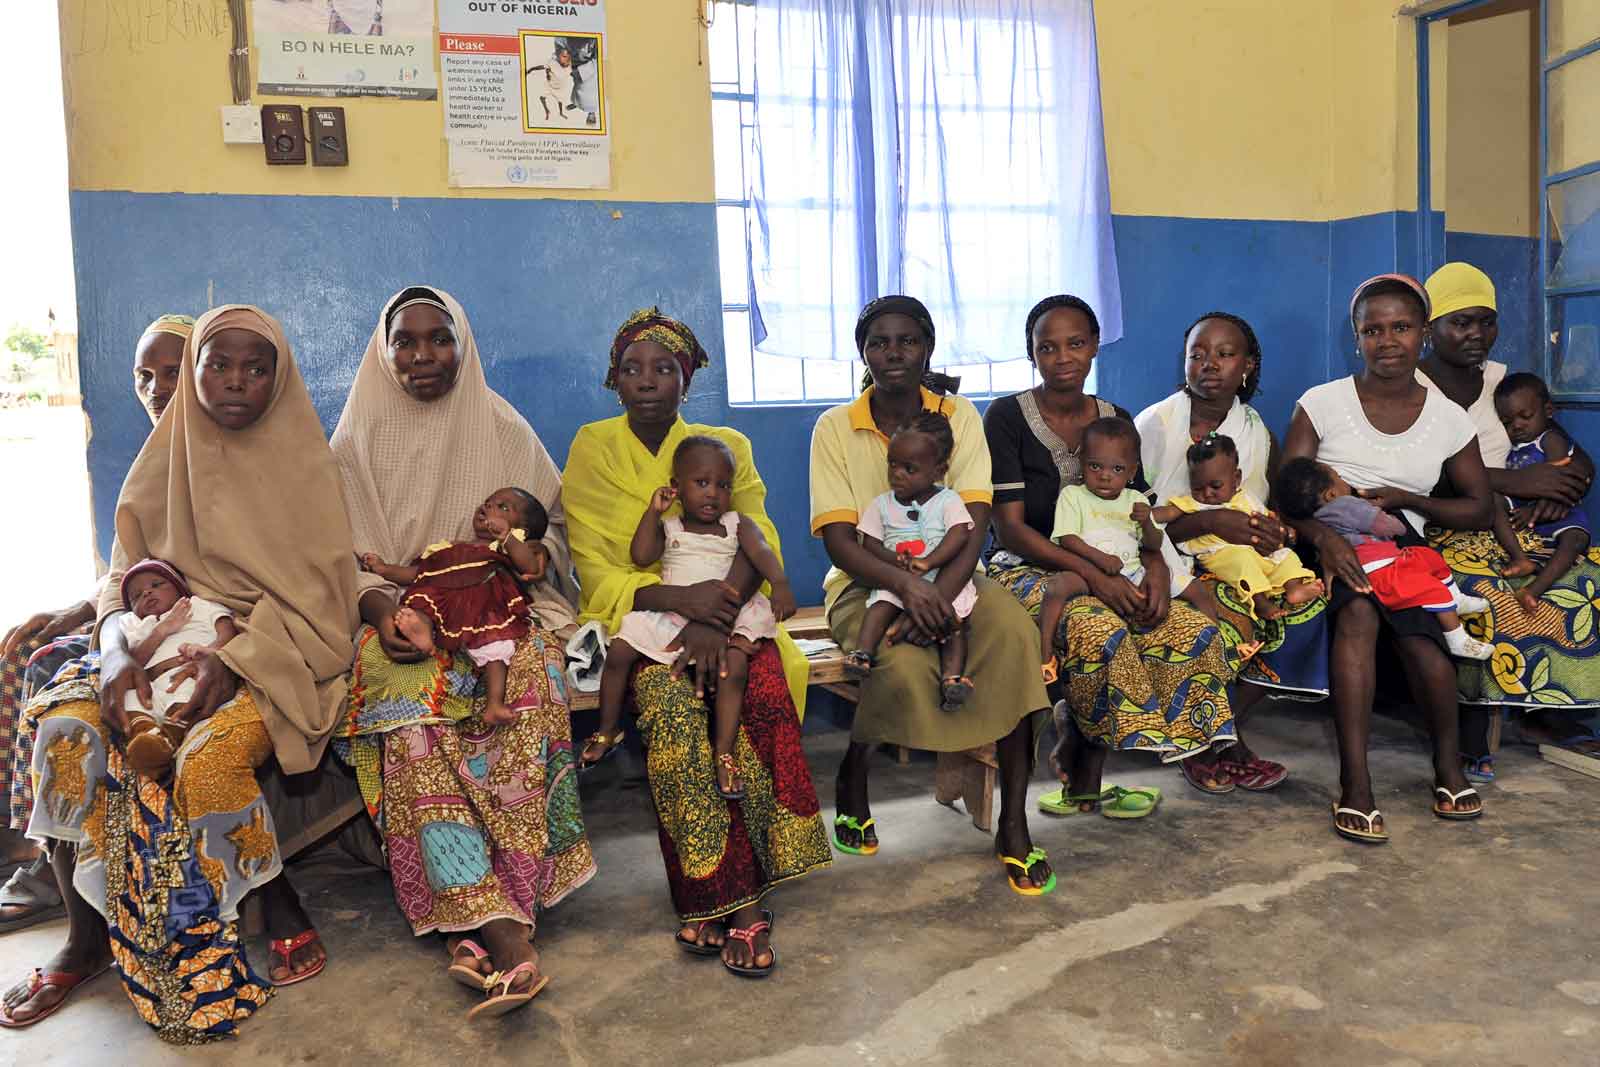 Under Nigeria’s federal system of government, each state organises and delivers health care autonomously. This translates into marked differences in the quality of health care, including immunisation, between states. Here women wait at a maternal health clinic in Niger State.